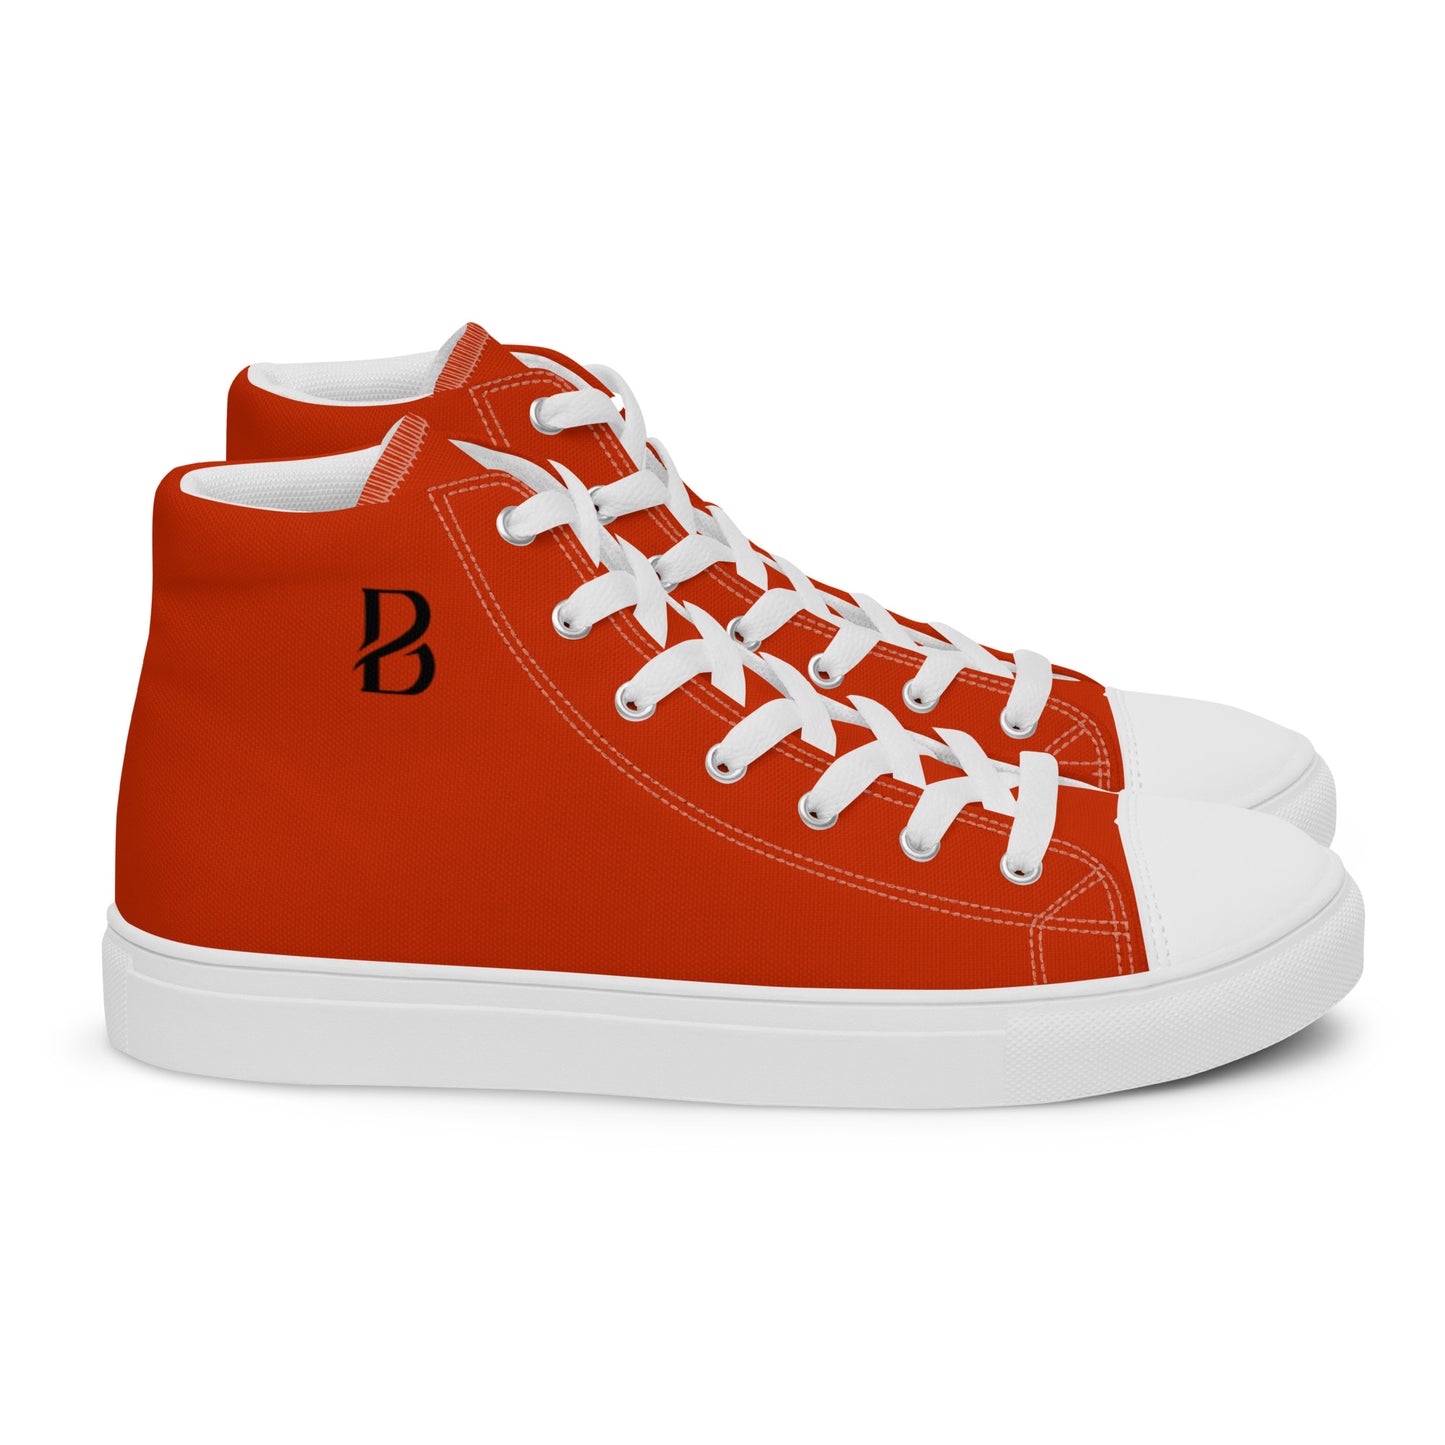 Harley Red & Black Logo Born To Move "B" Men’s High Top Canvas Shoes